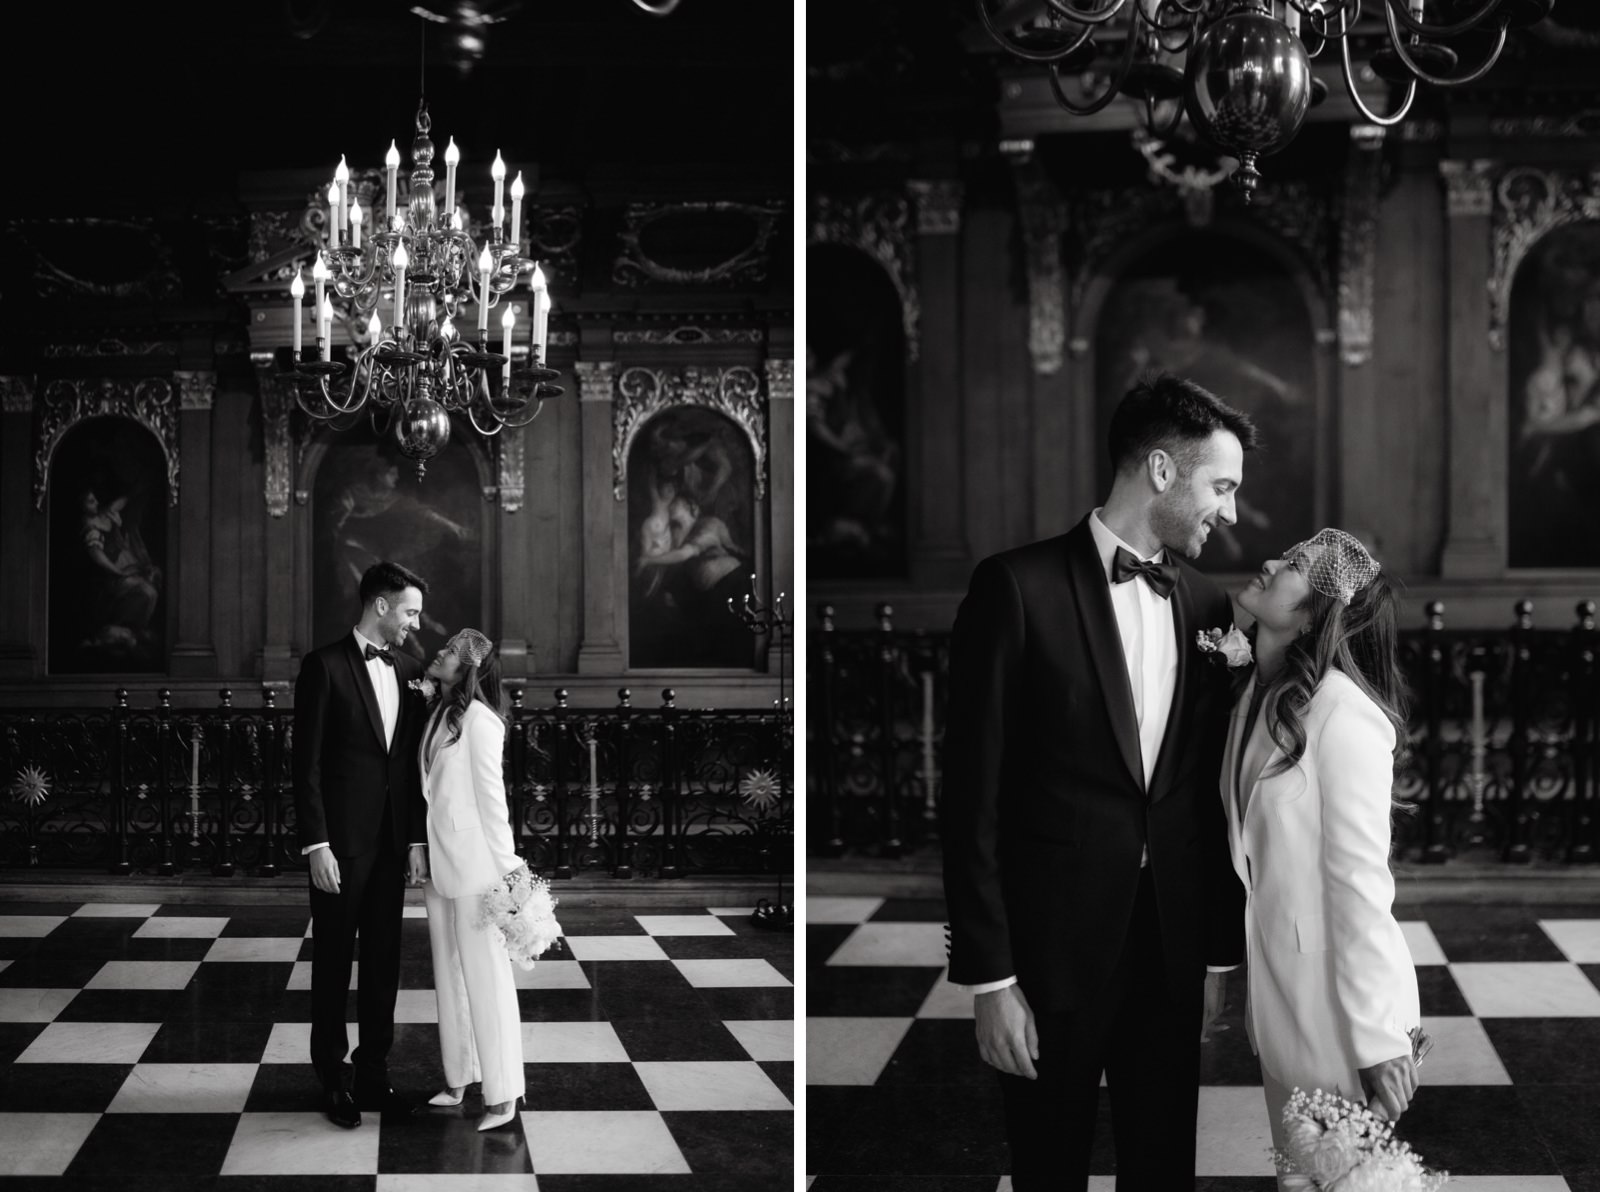 intimate wedding in old city hall in The Hague, Netherlands